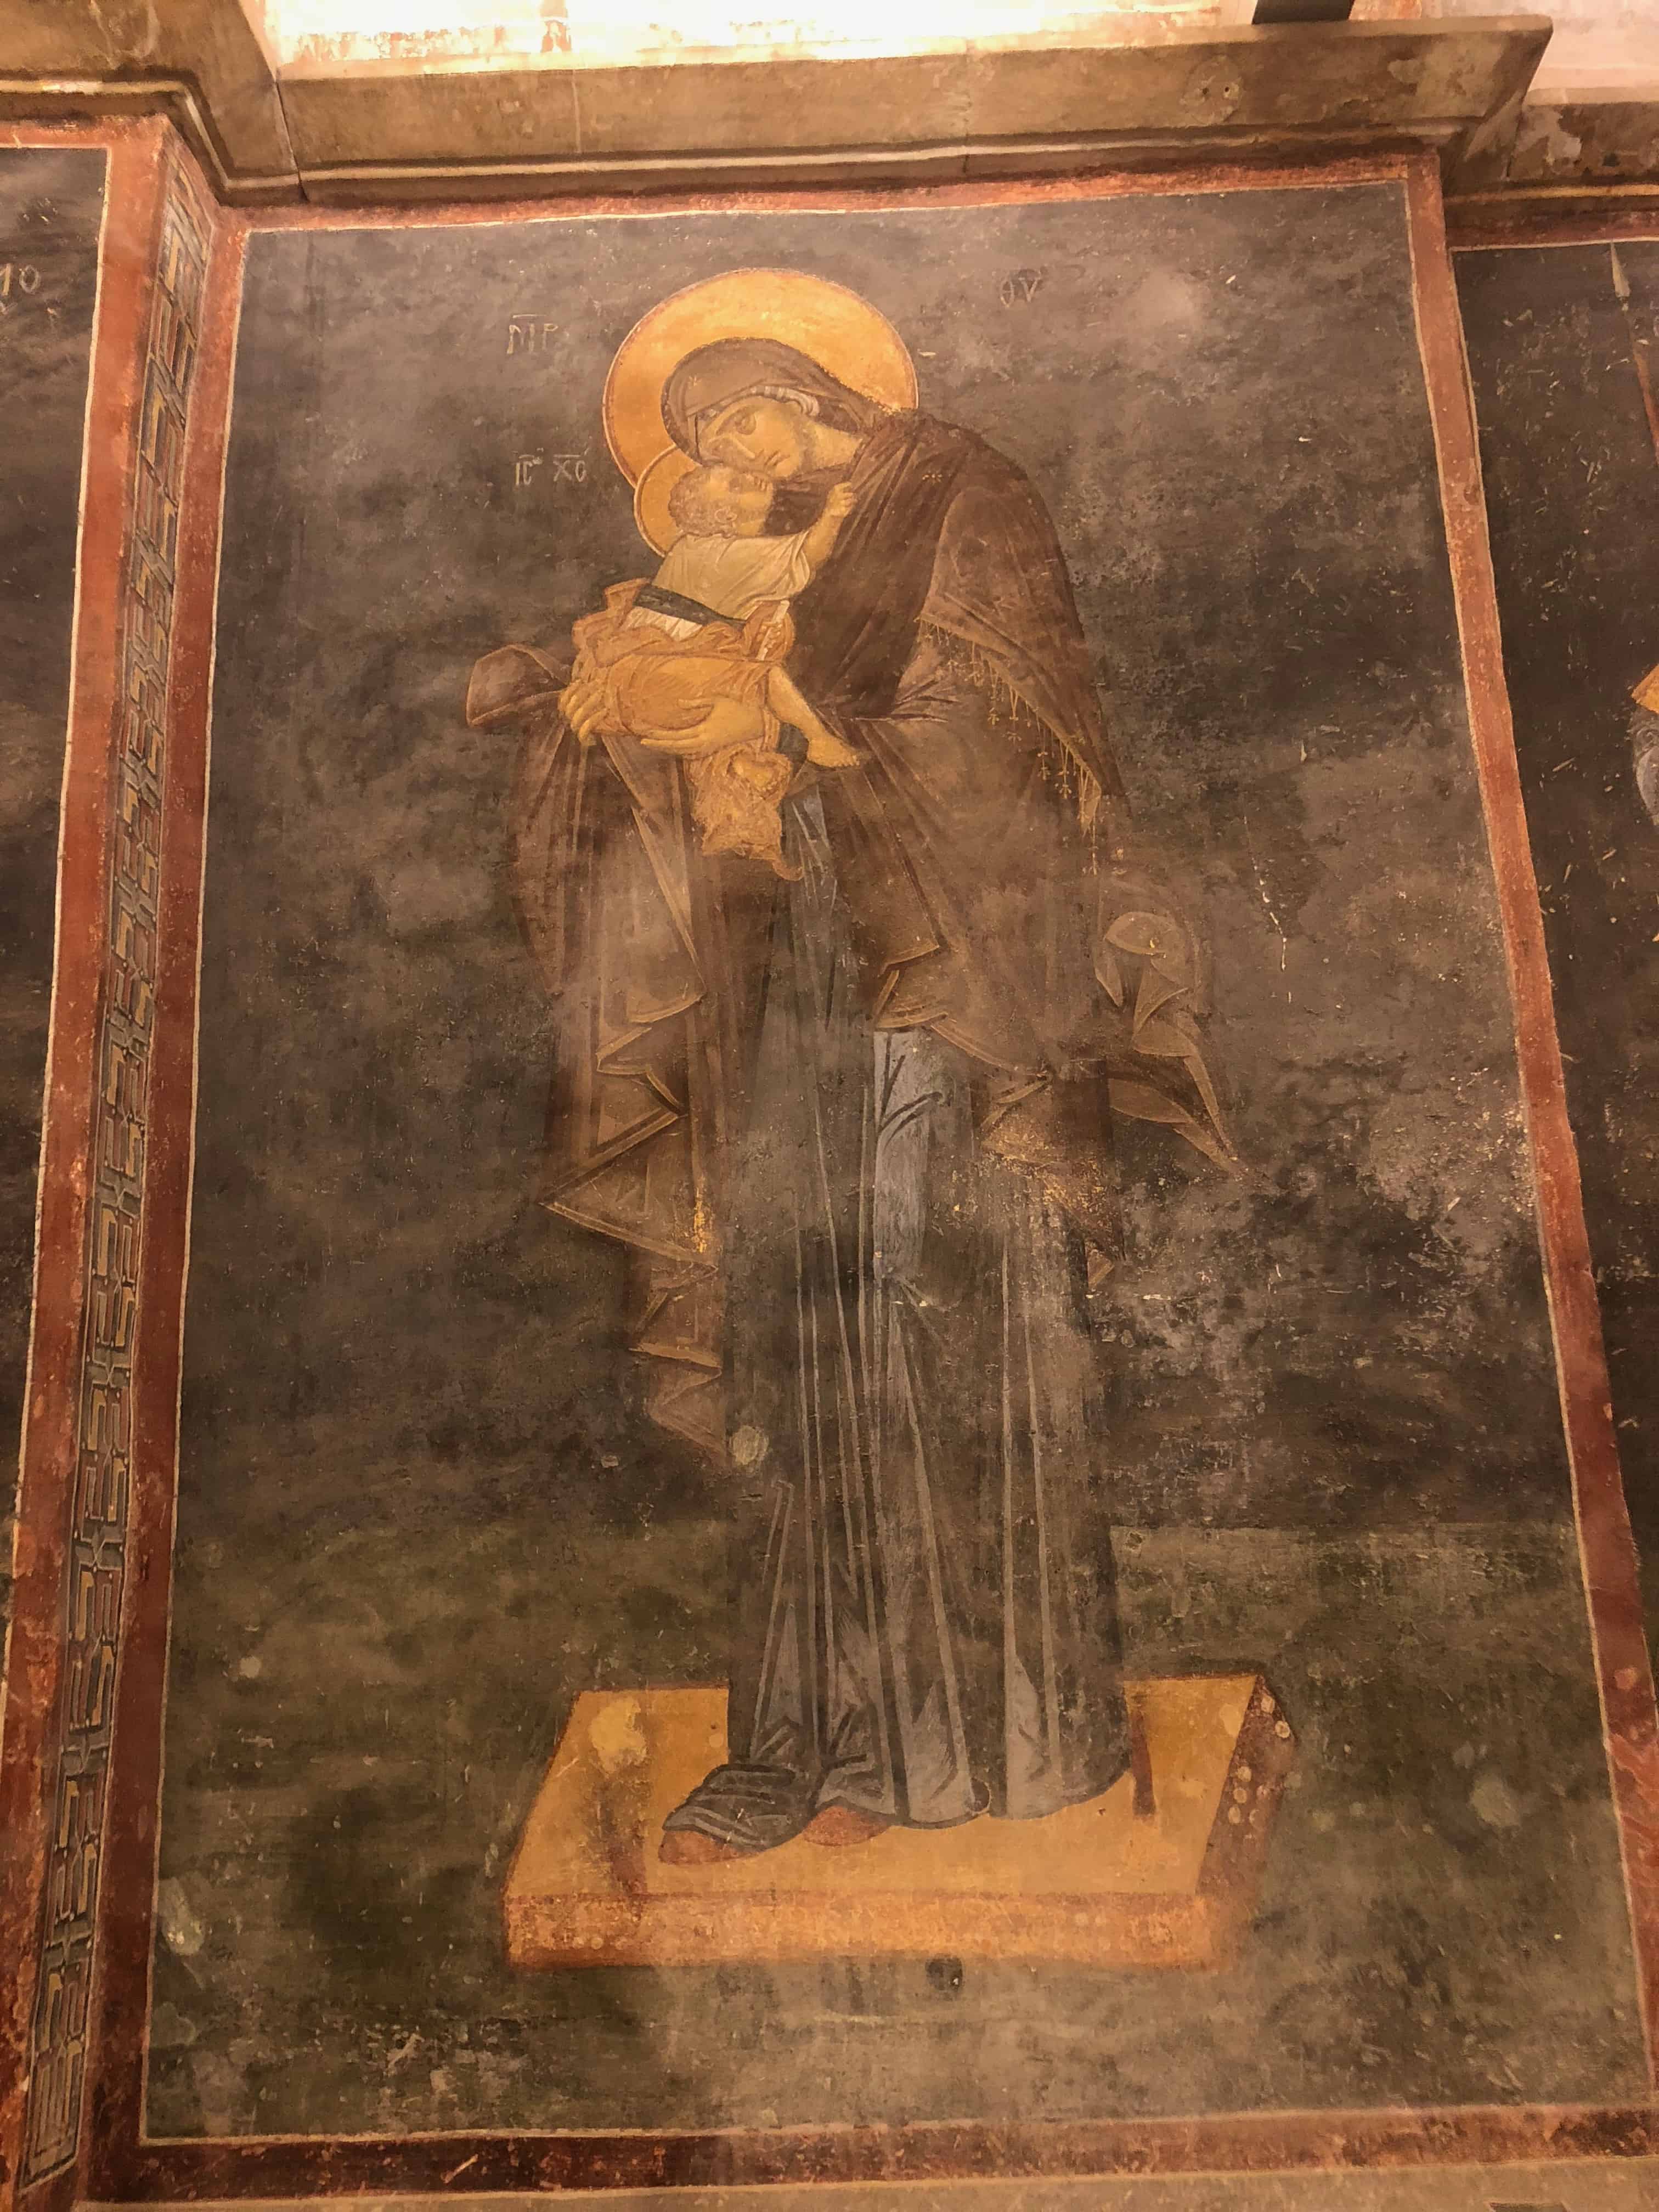 Virgin and Child at Chora Church in Istanbul, Turkey